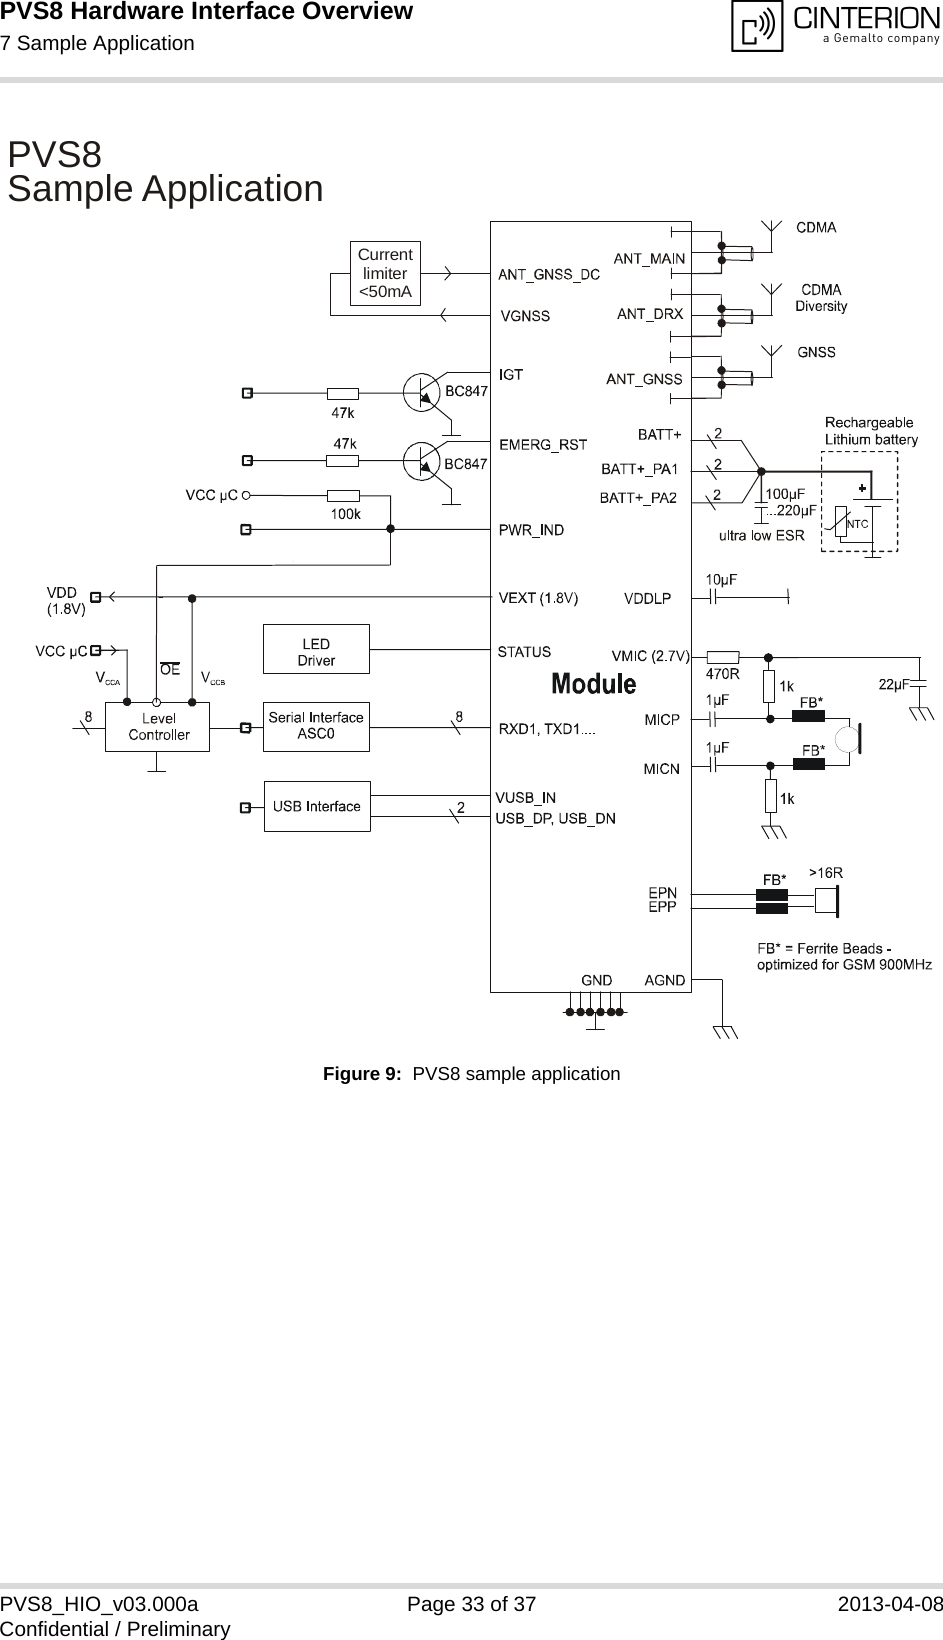 PVS8 Hardware Interface Overview7 Sample Application33PVS8_HIO_v03.000a Page 33 of 37 2013-04-08Confidential / PreliminaryFigure 9:  PVS8 sample applicationPVS8  Application SampleCurrentlimiter&lt;50mA